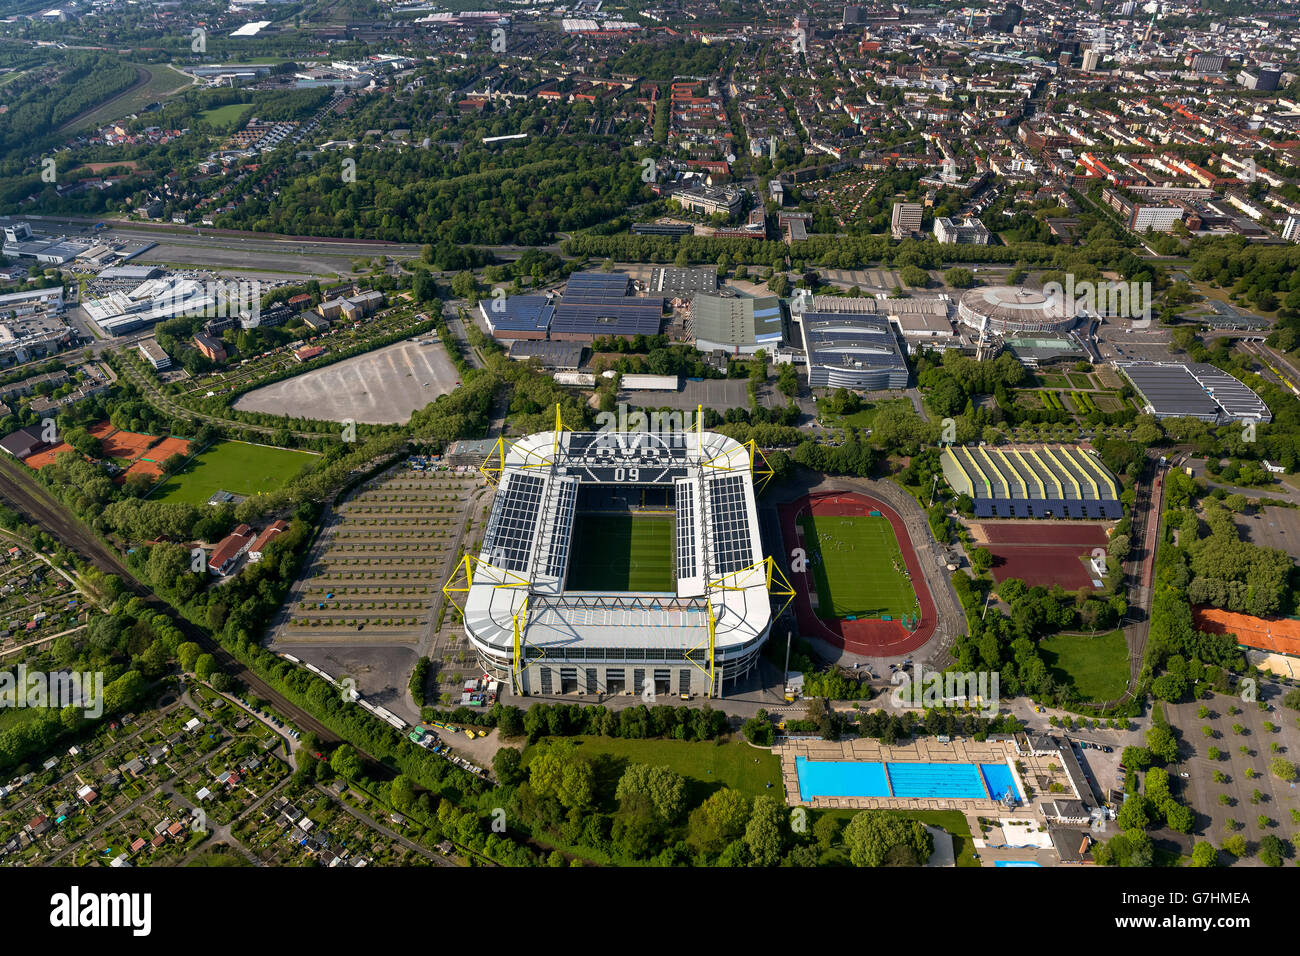 Aerial view, Signal Iduna Park, Westfalenstadion with new office Fanshop under construction, solar panels on the stadium roof, Stock Photo